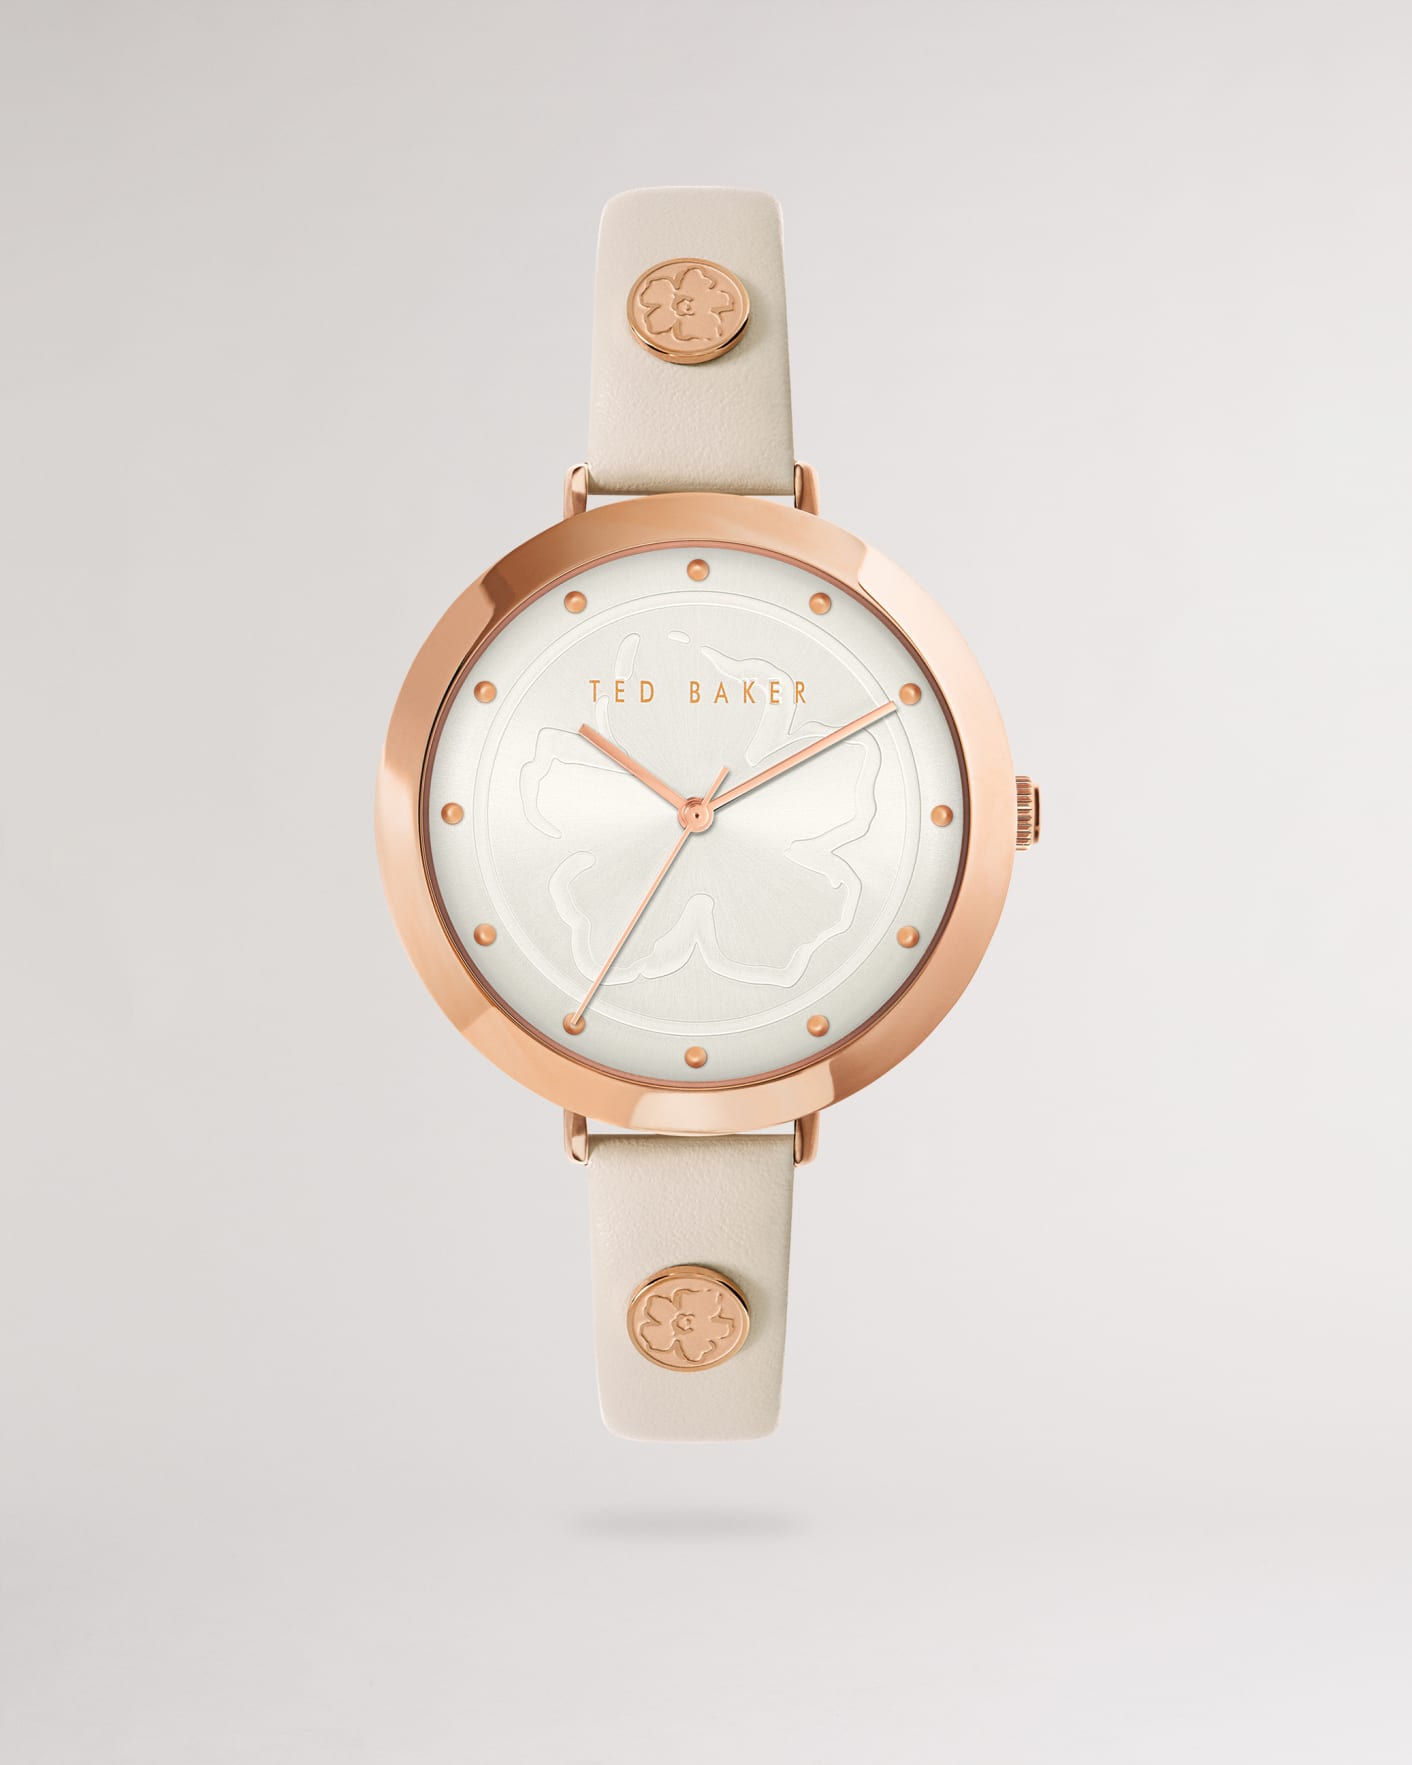 Ecru Magnolia Leather Strap Watch Ted Baker